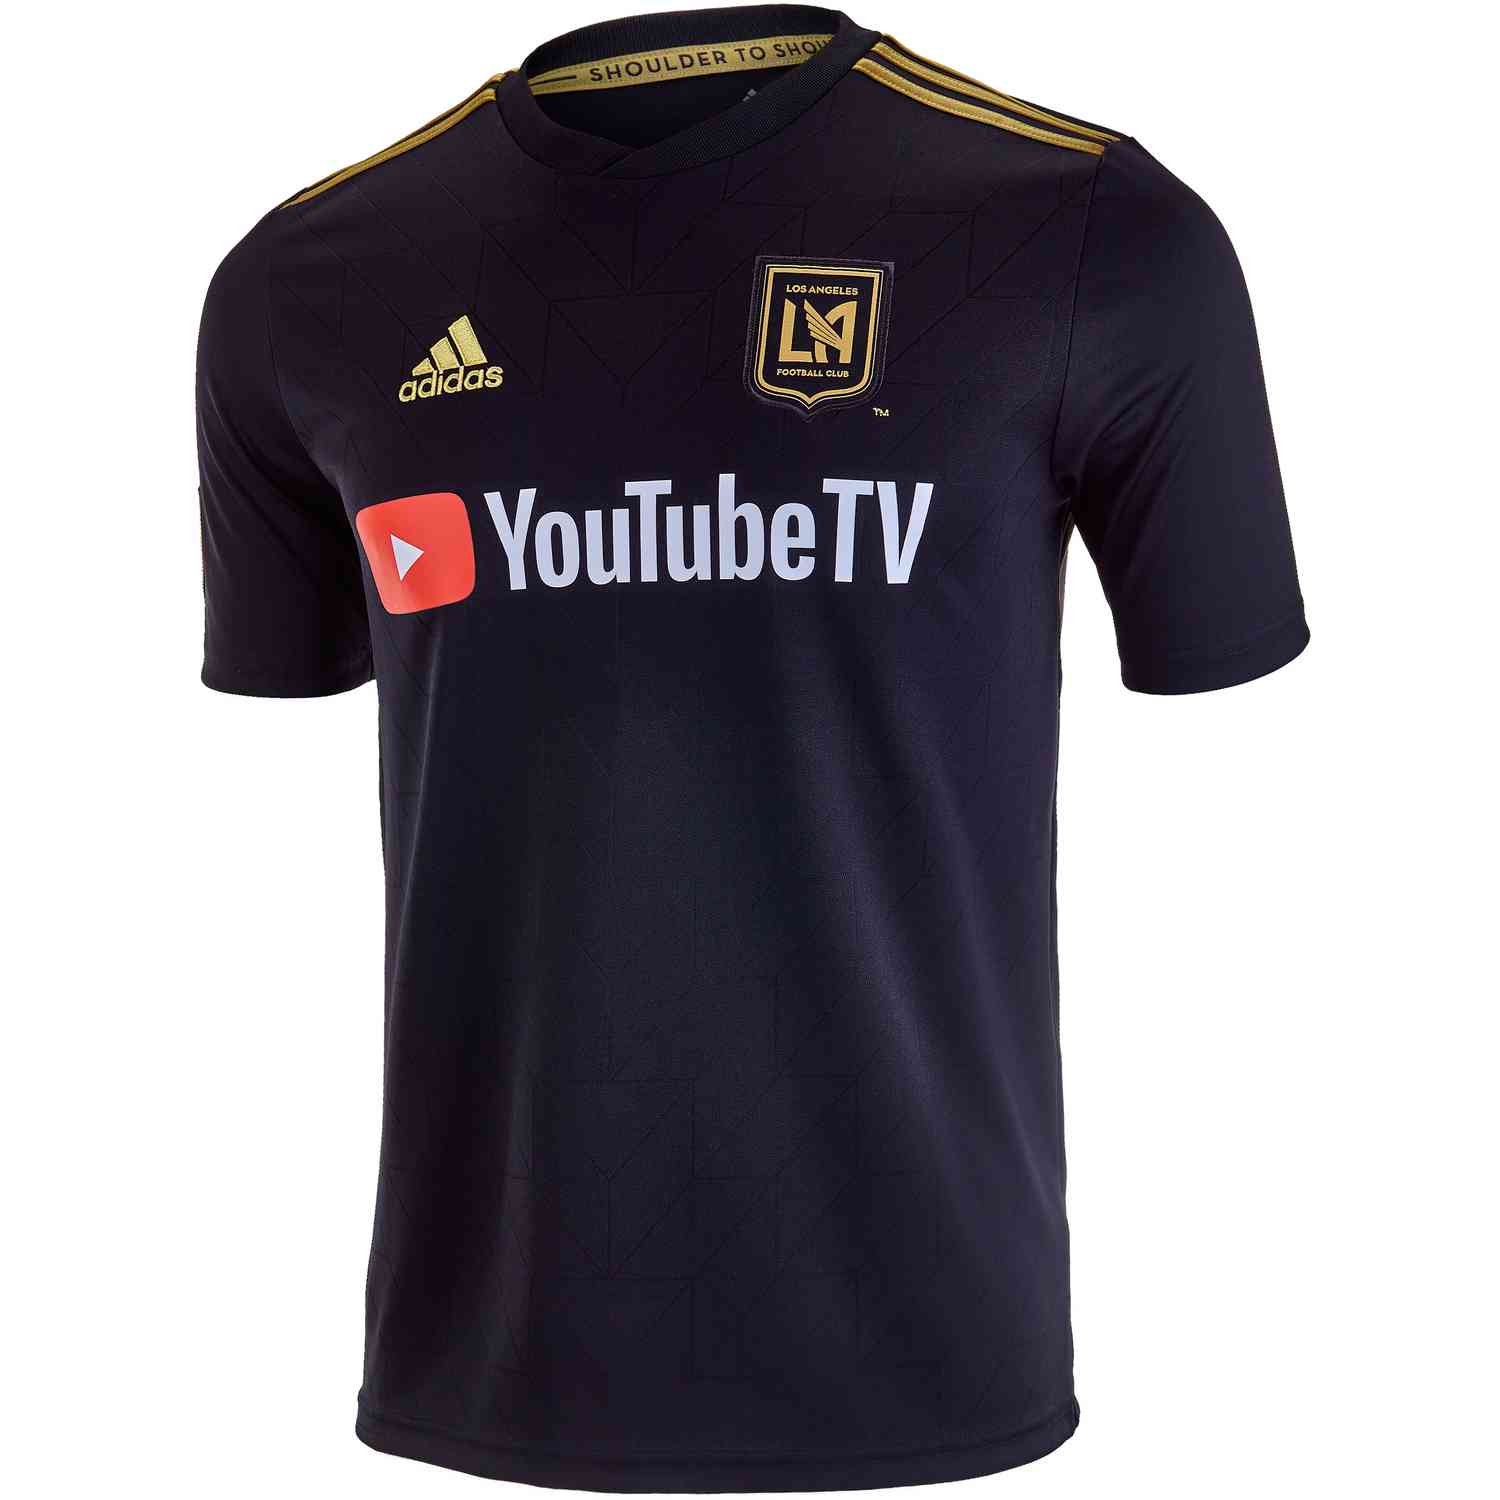 lafc toddler jersey